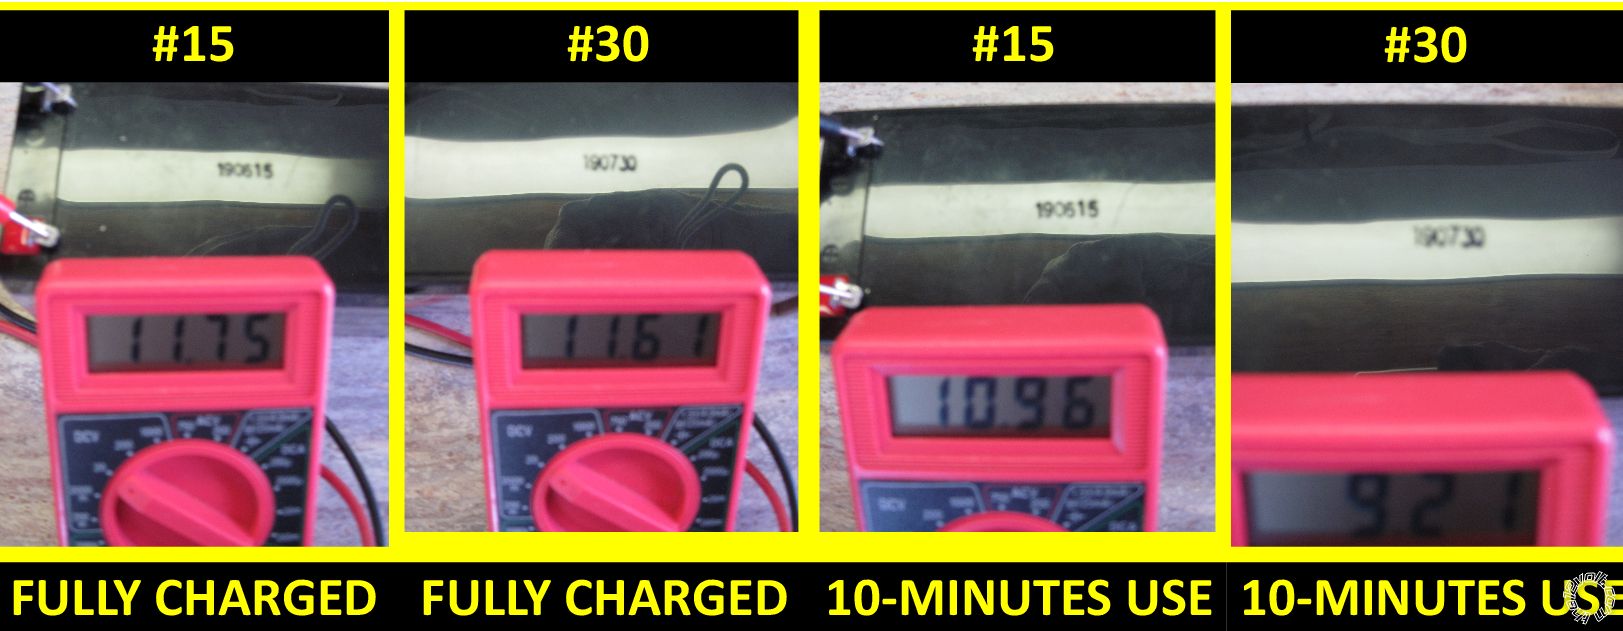 Two 12 Volt Batteries Usage Time? -- posted image.